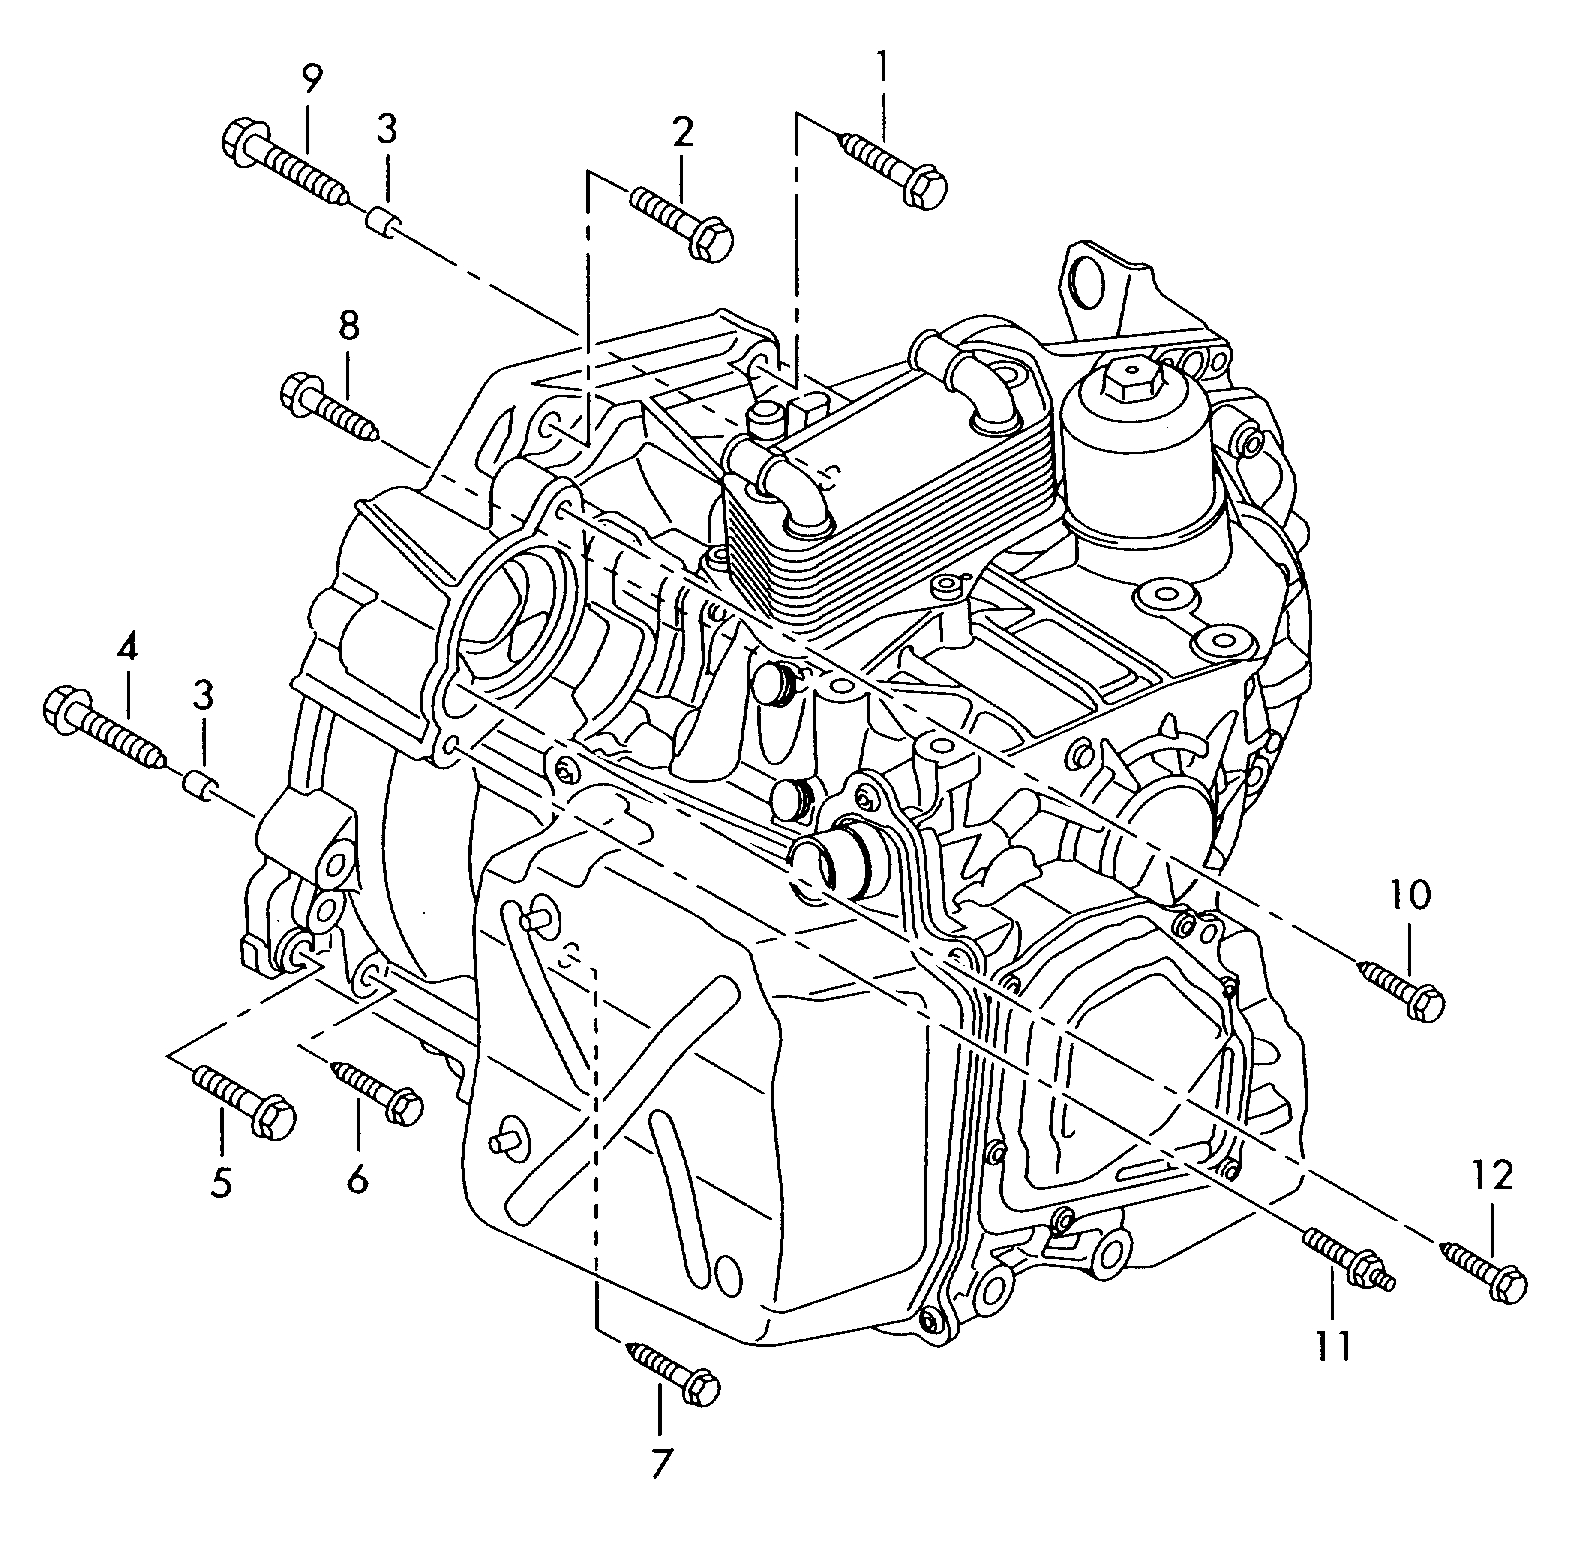 mounting parts for engine and<br>transmission6-speed dual clutch gearbox<br>for four-wheel drive DQ250 - Yeti - yet